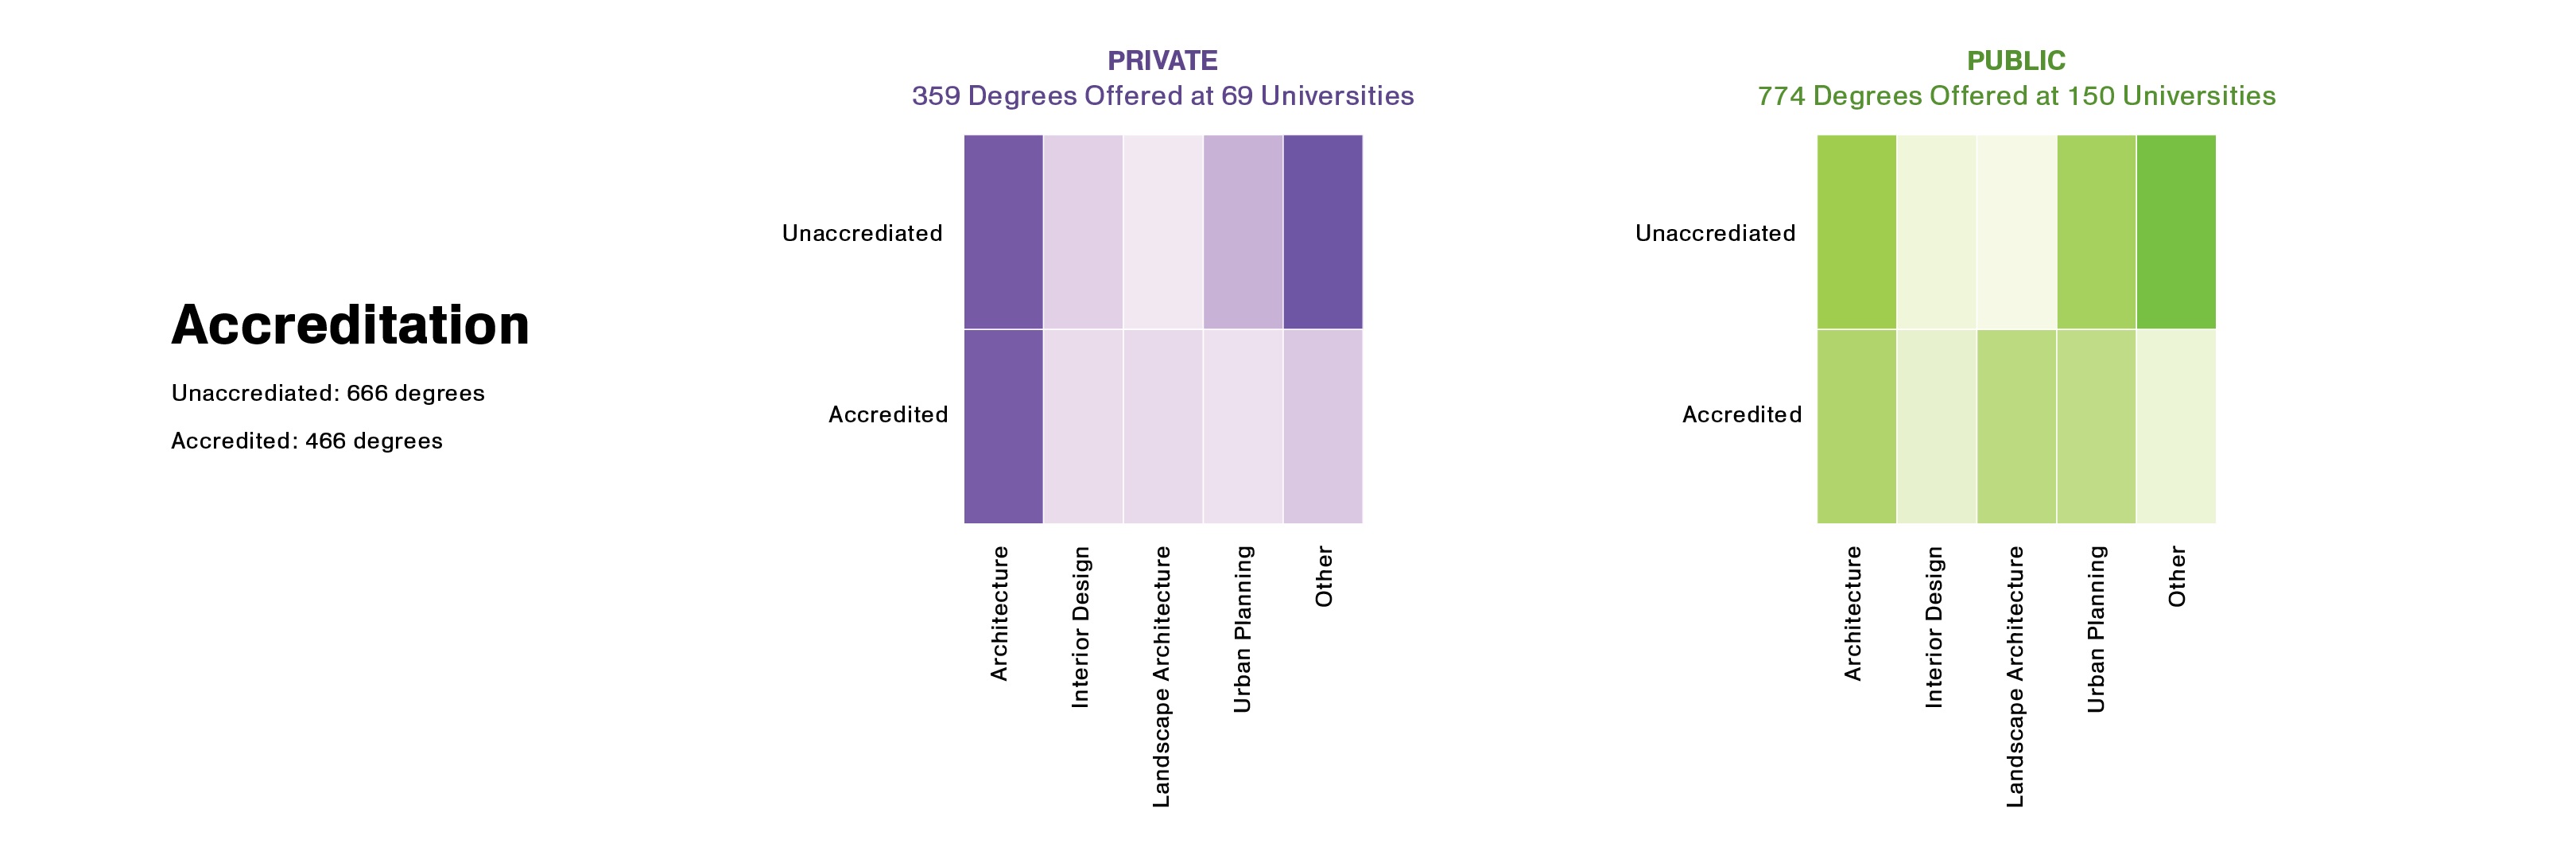 Degrees by Accreditation in Private and Public Universities 